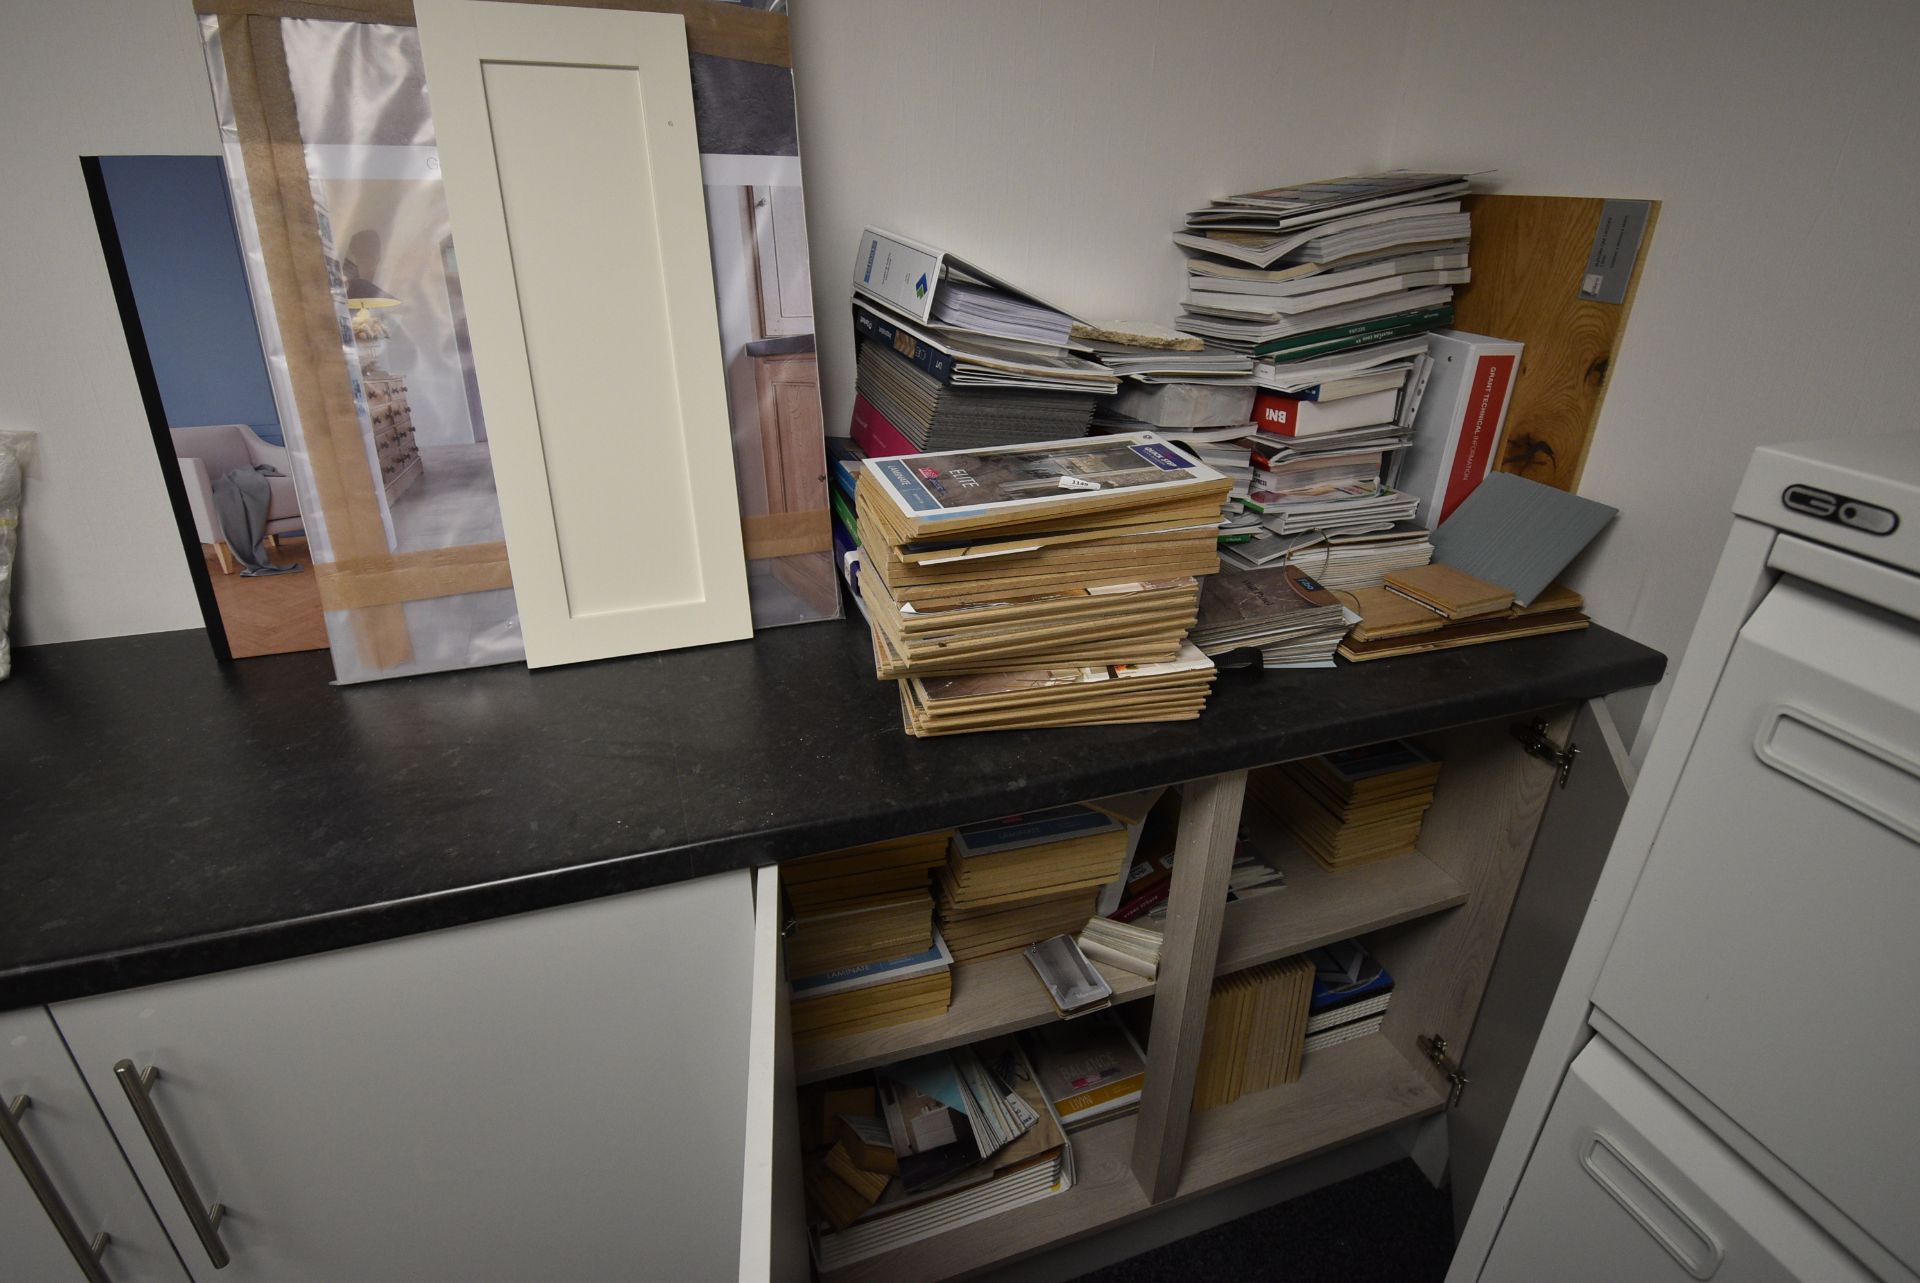 *Assorted Sample Boards etc. (Location: 64 King Edward St, Grimsby, DN31 3JP, Viewing Tuesday